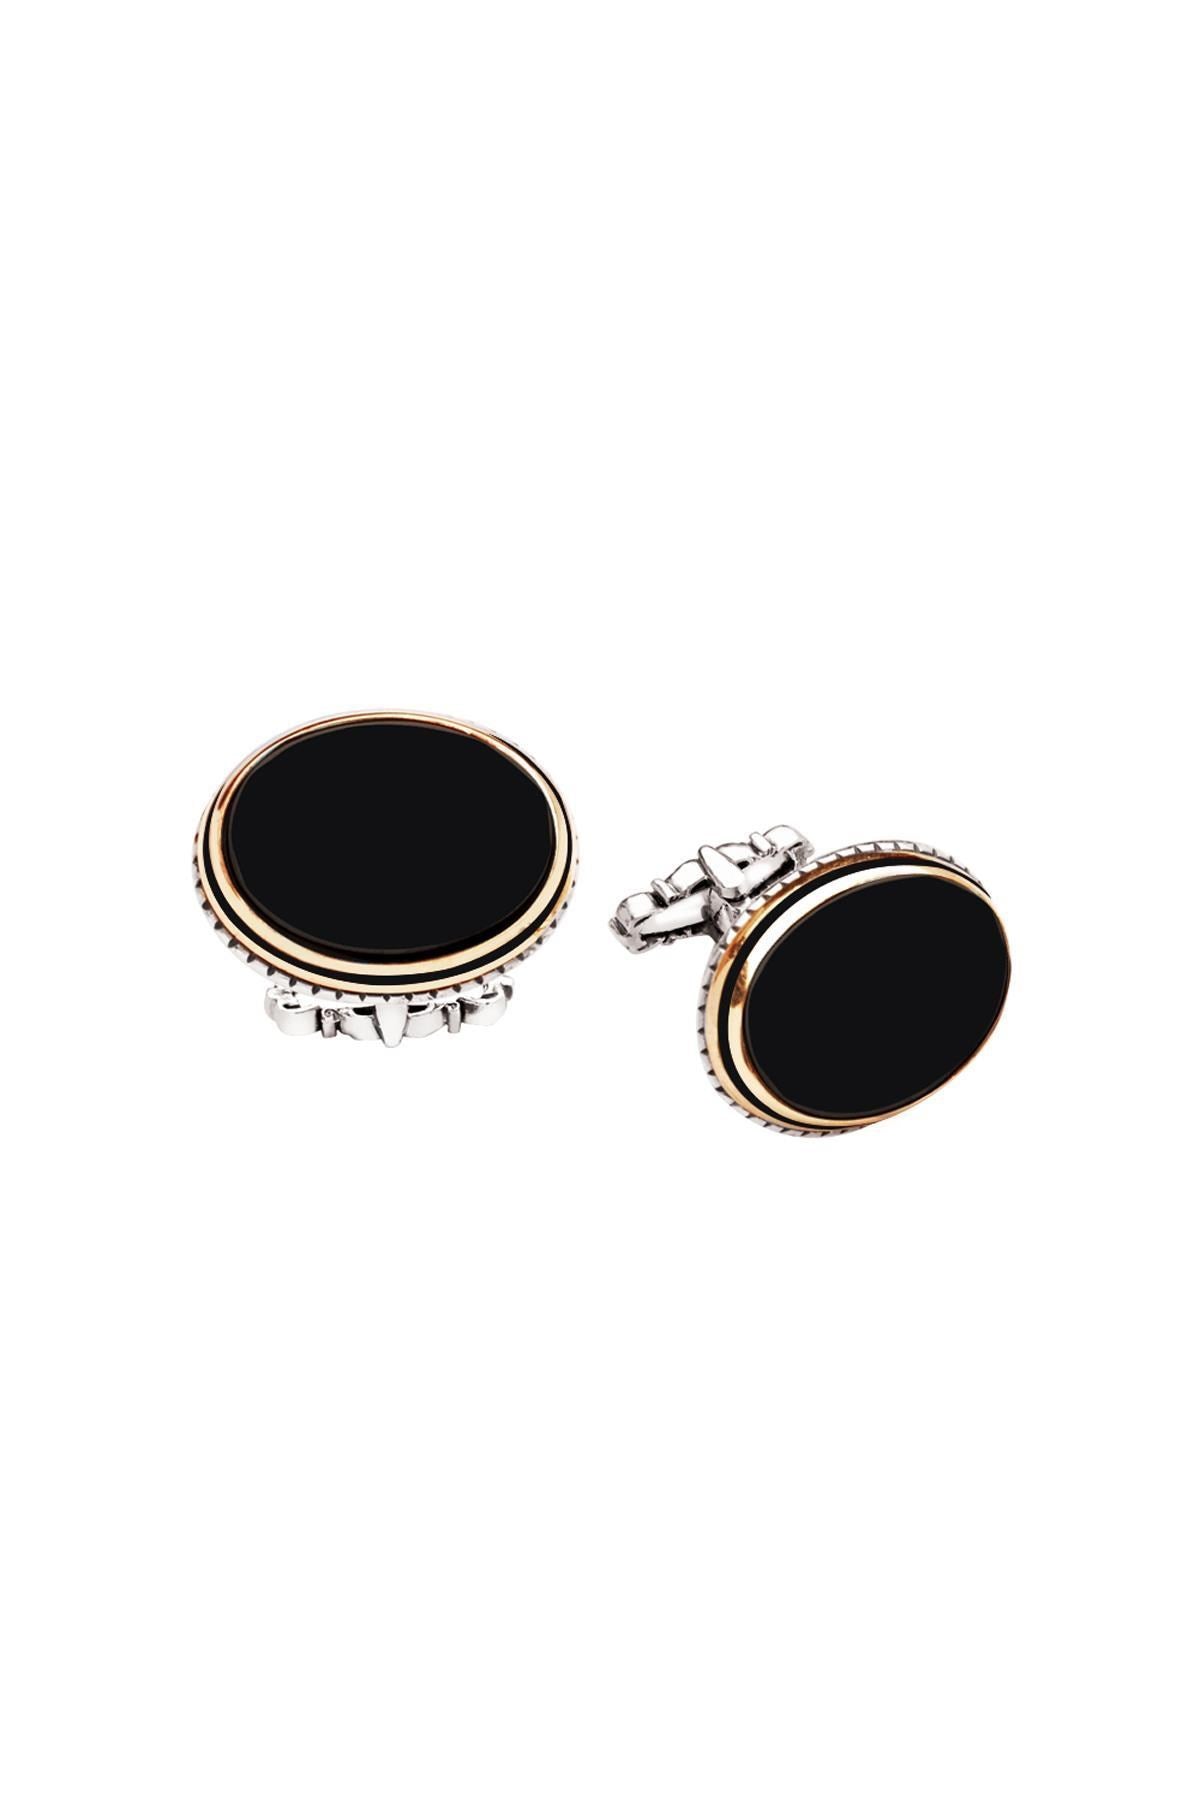 OrlaSilver Sterling Silver Black Onyx Round Cufflinks - Premier Gift for Groomsmen & Significant Events